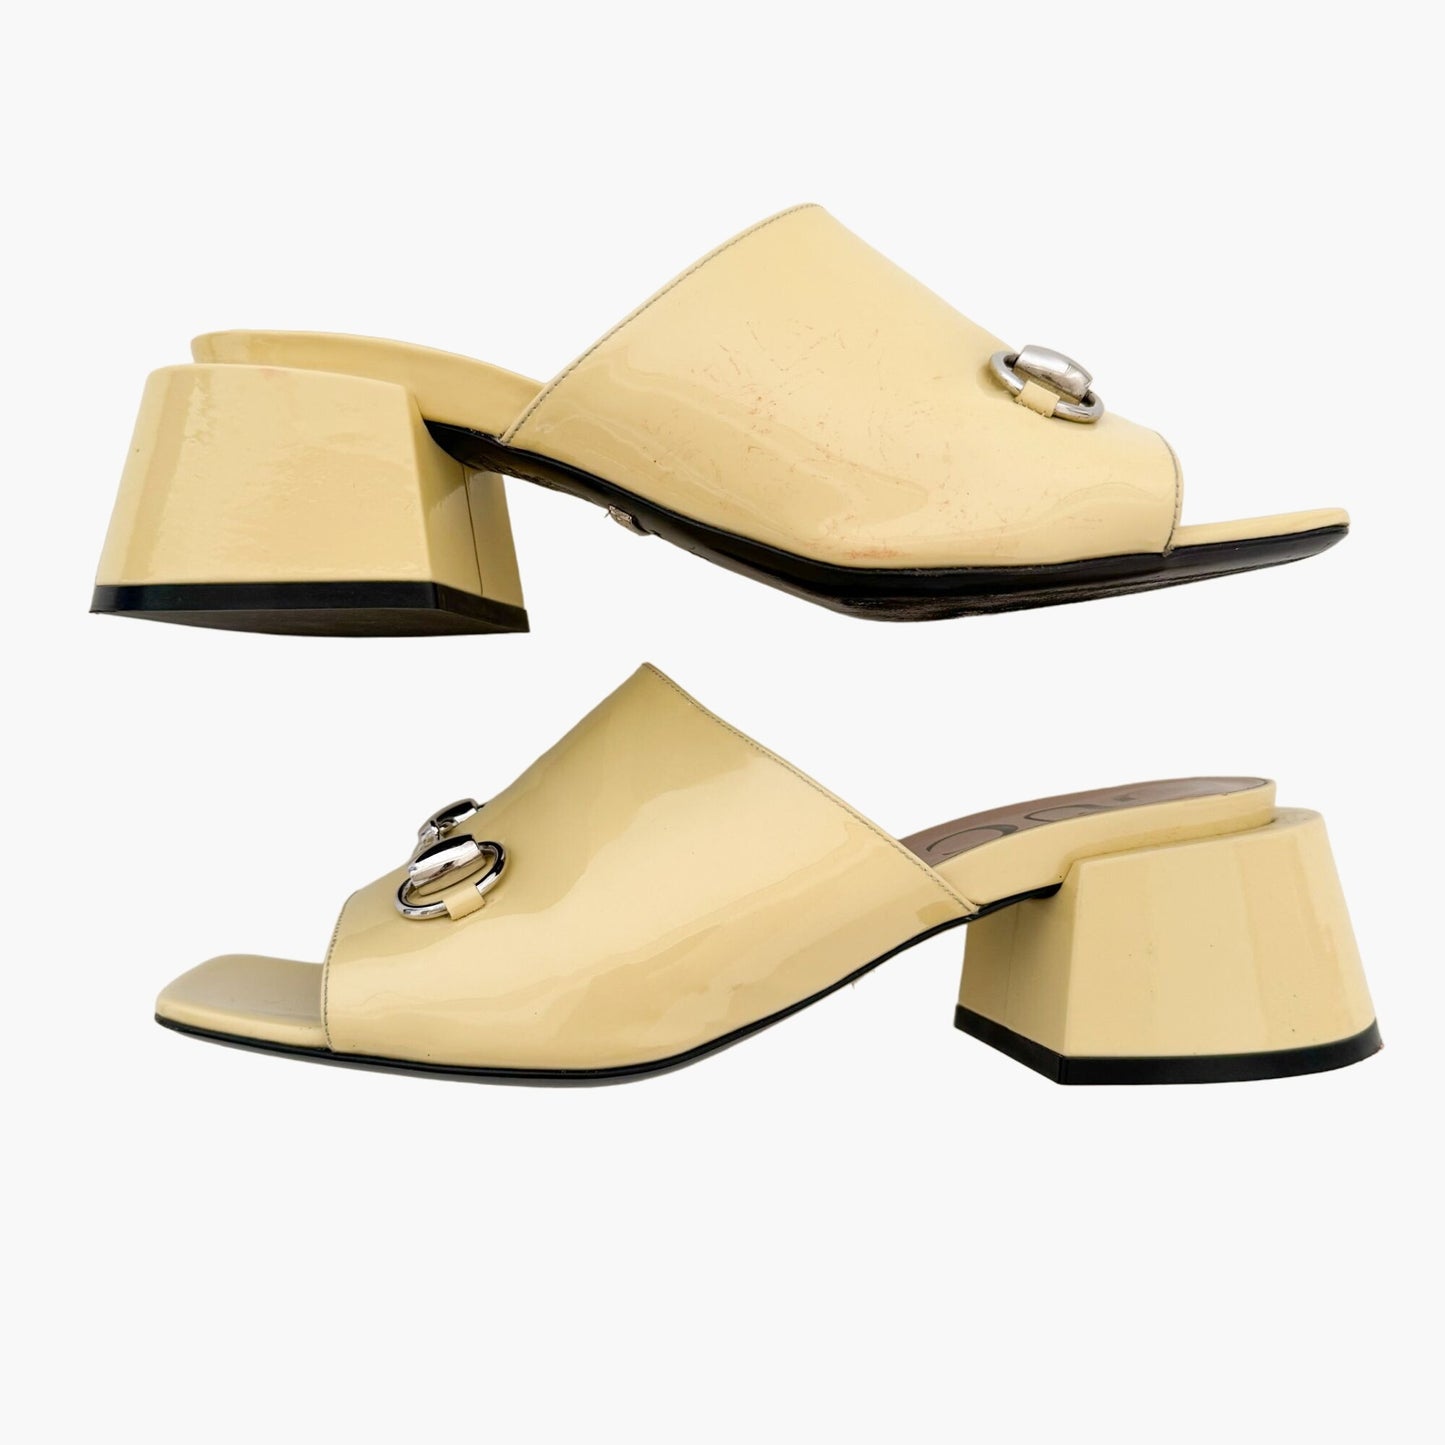 Gucci Lexi Horsebit Mules in Pastel Yellow Patent Leather Size 38